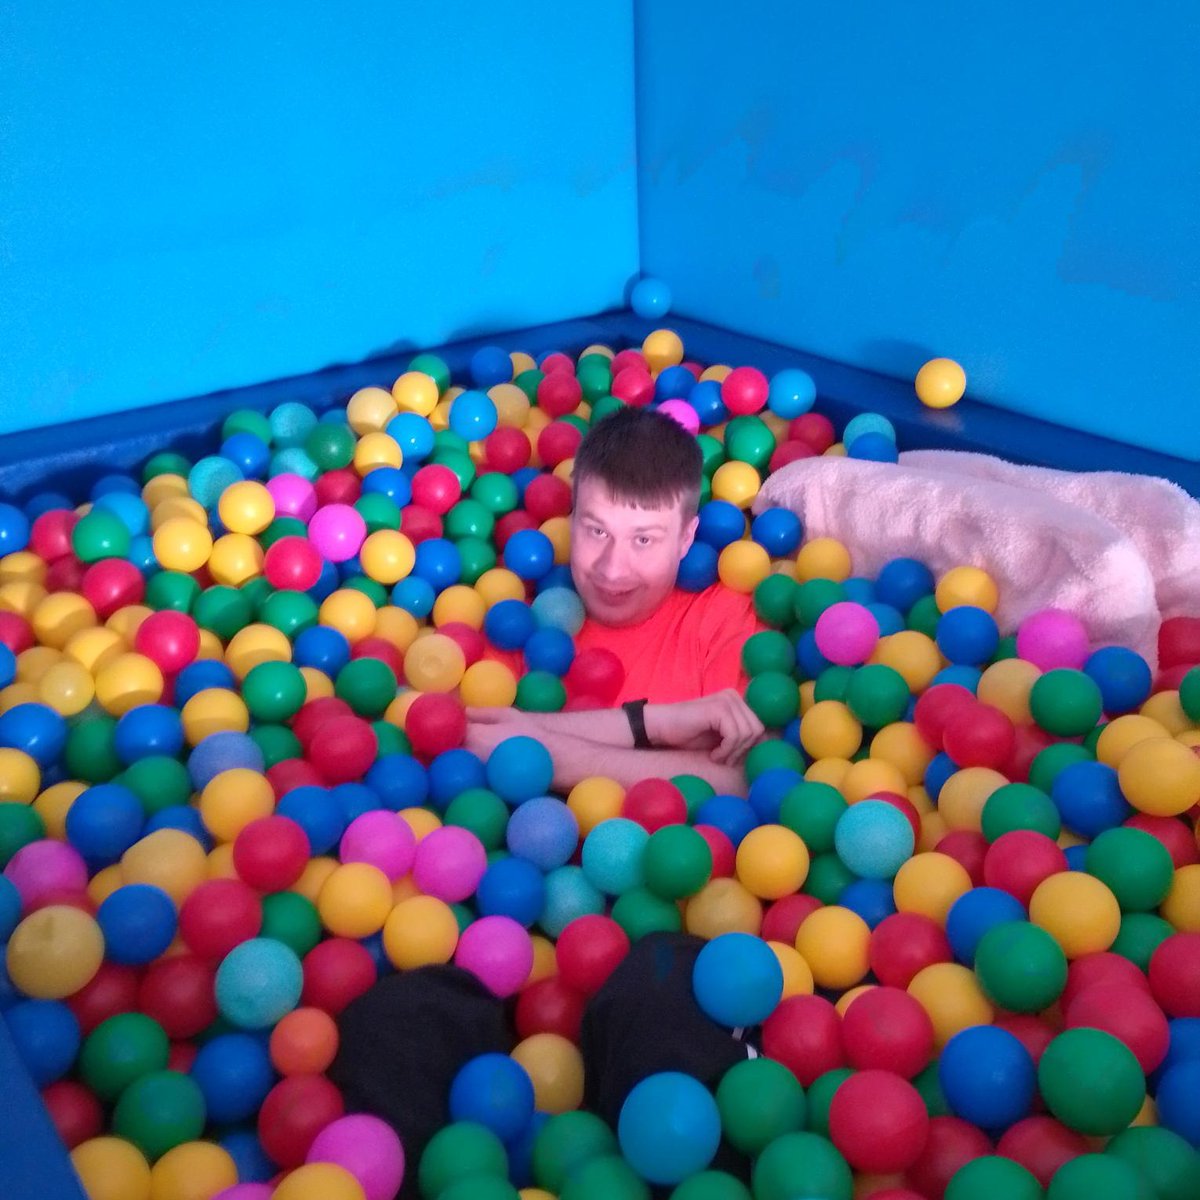 Michael had a fun filled day with Jessica last week, going bowling @HollywoodBowlUK, getting a coffee @LeedsMarkets and relaxing by submerging himself in ball pool at our Grape Street Base 🎳☕️💆‍♂️ #autism #inclusion #sensoryactivities